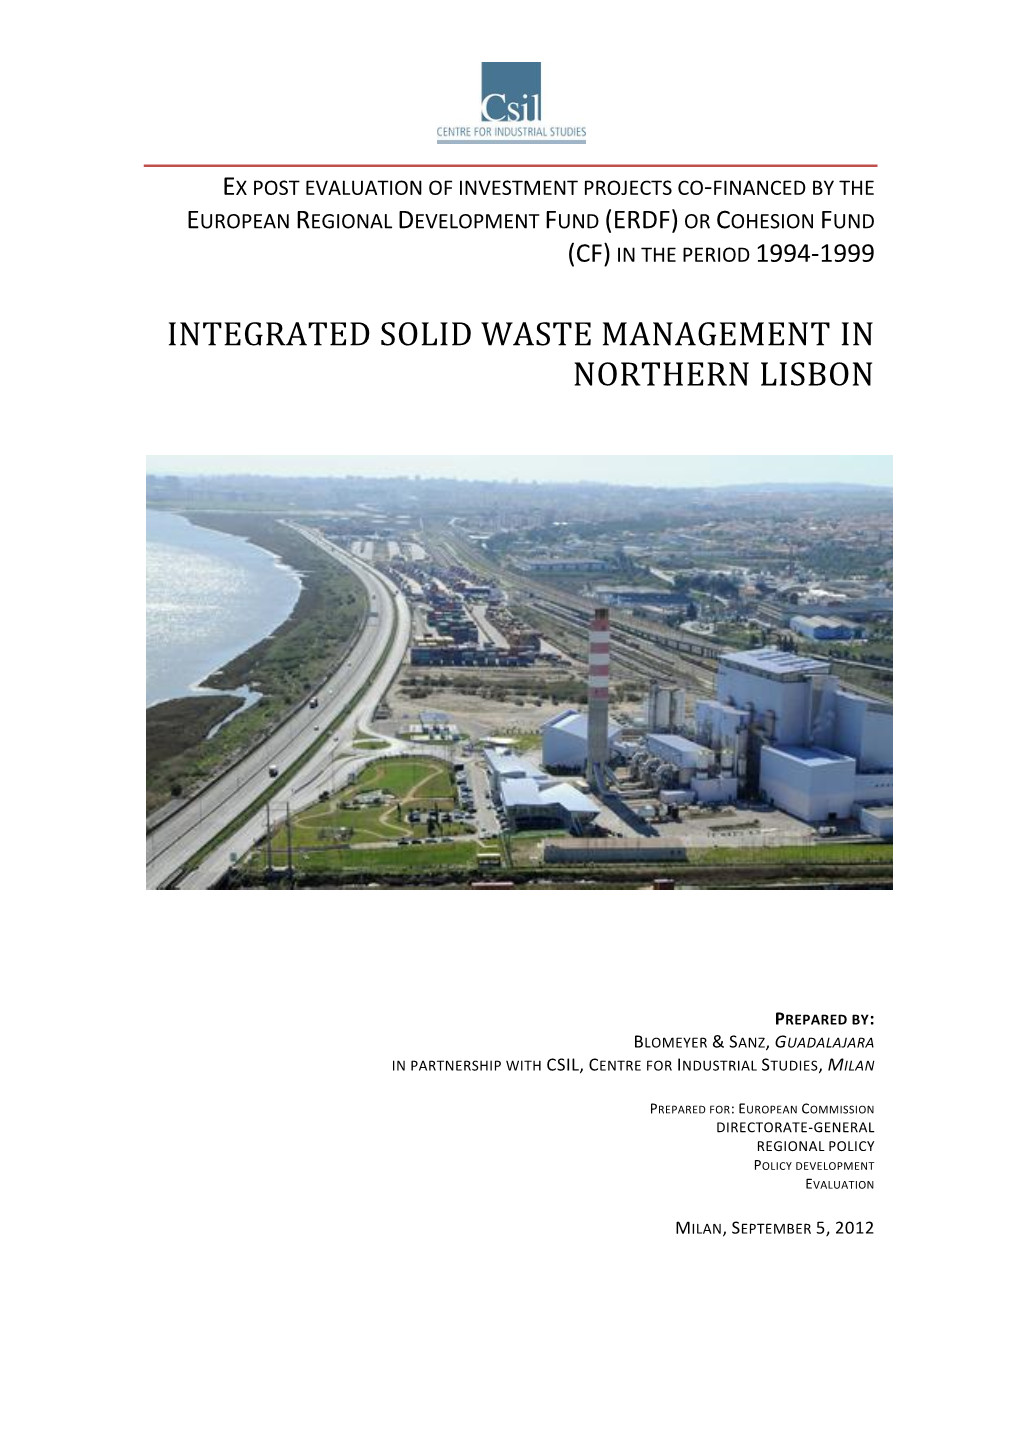 Integrated Solid Waste Management in Northern Lisbon